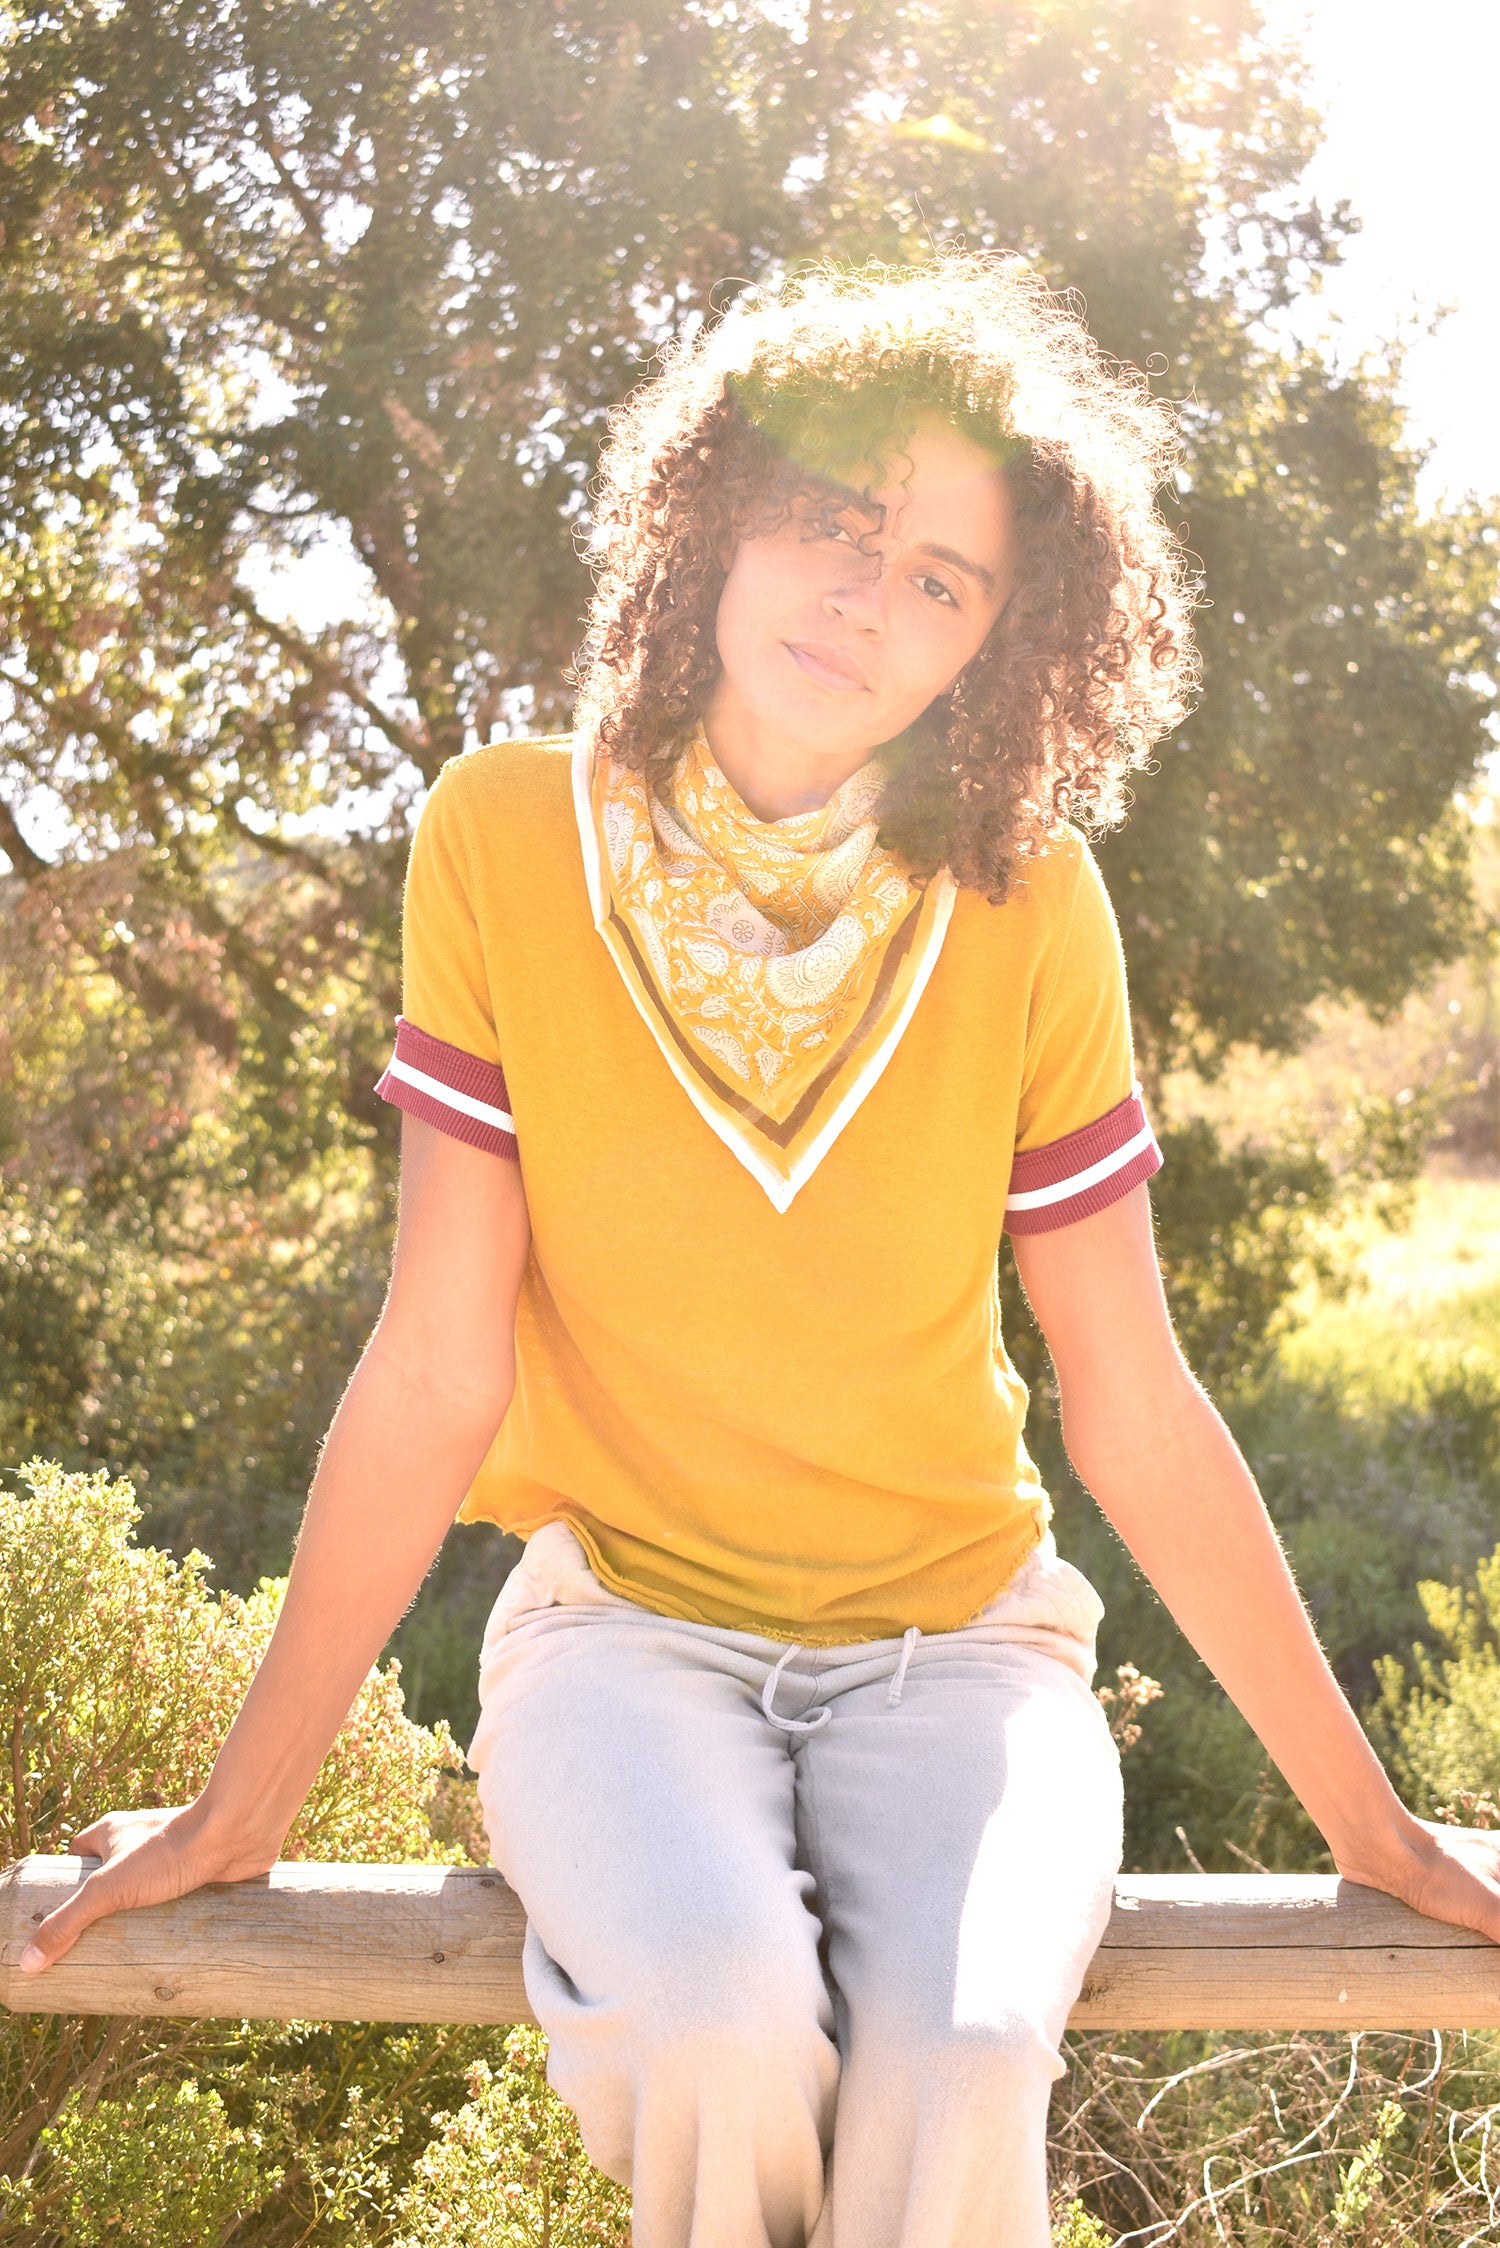 Woman wearing block print Tate bandana around the neck against a yellow tee shirt. Woman sitting on wooden fence with trees in the background.